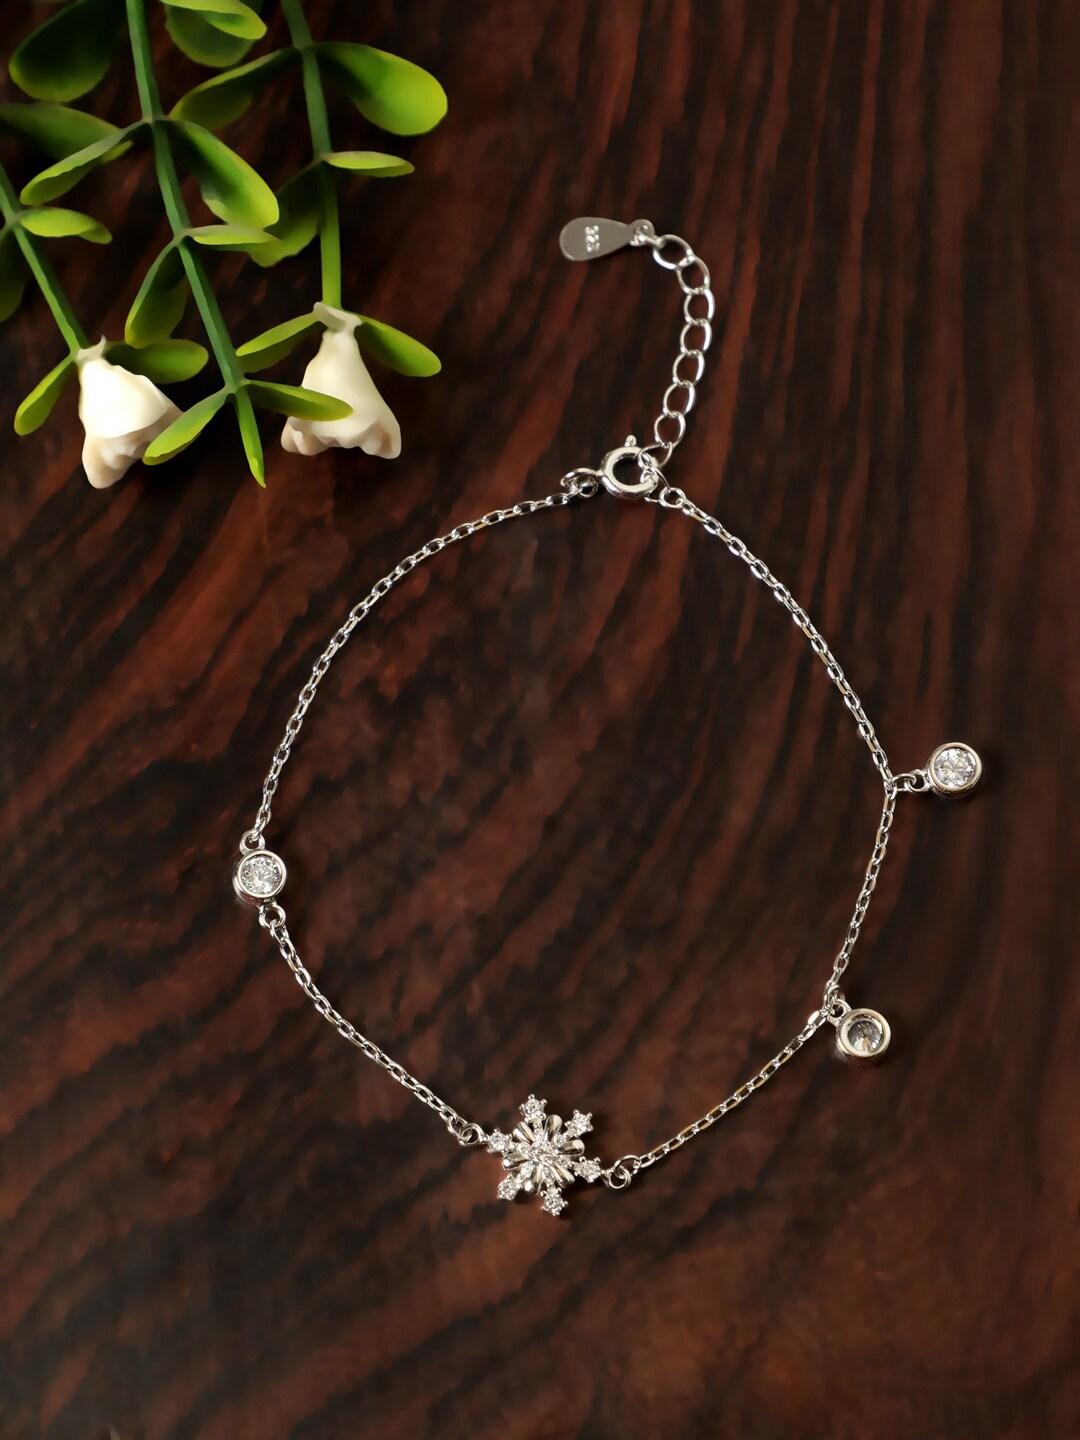 GIVA 925 Sterling Silver Rhodium-Plated Silver-Toned & White Stone-Studded Anklet